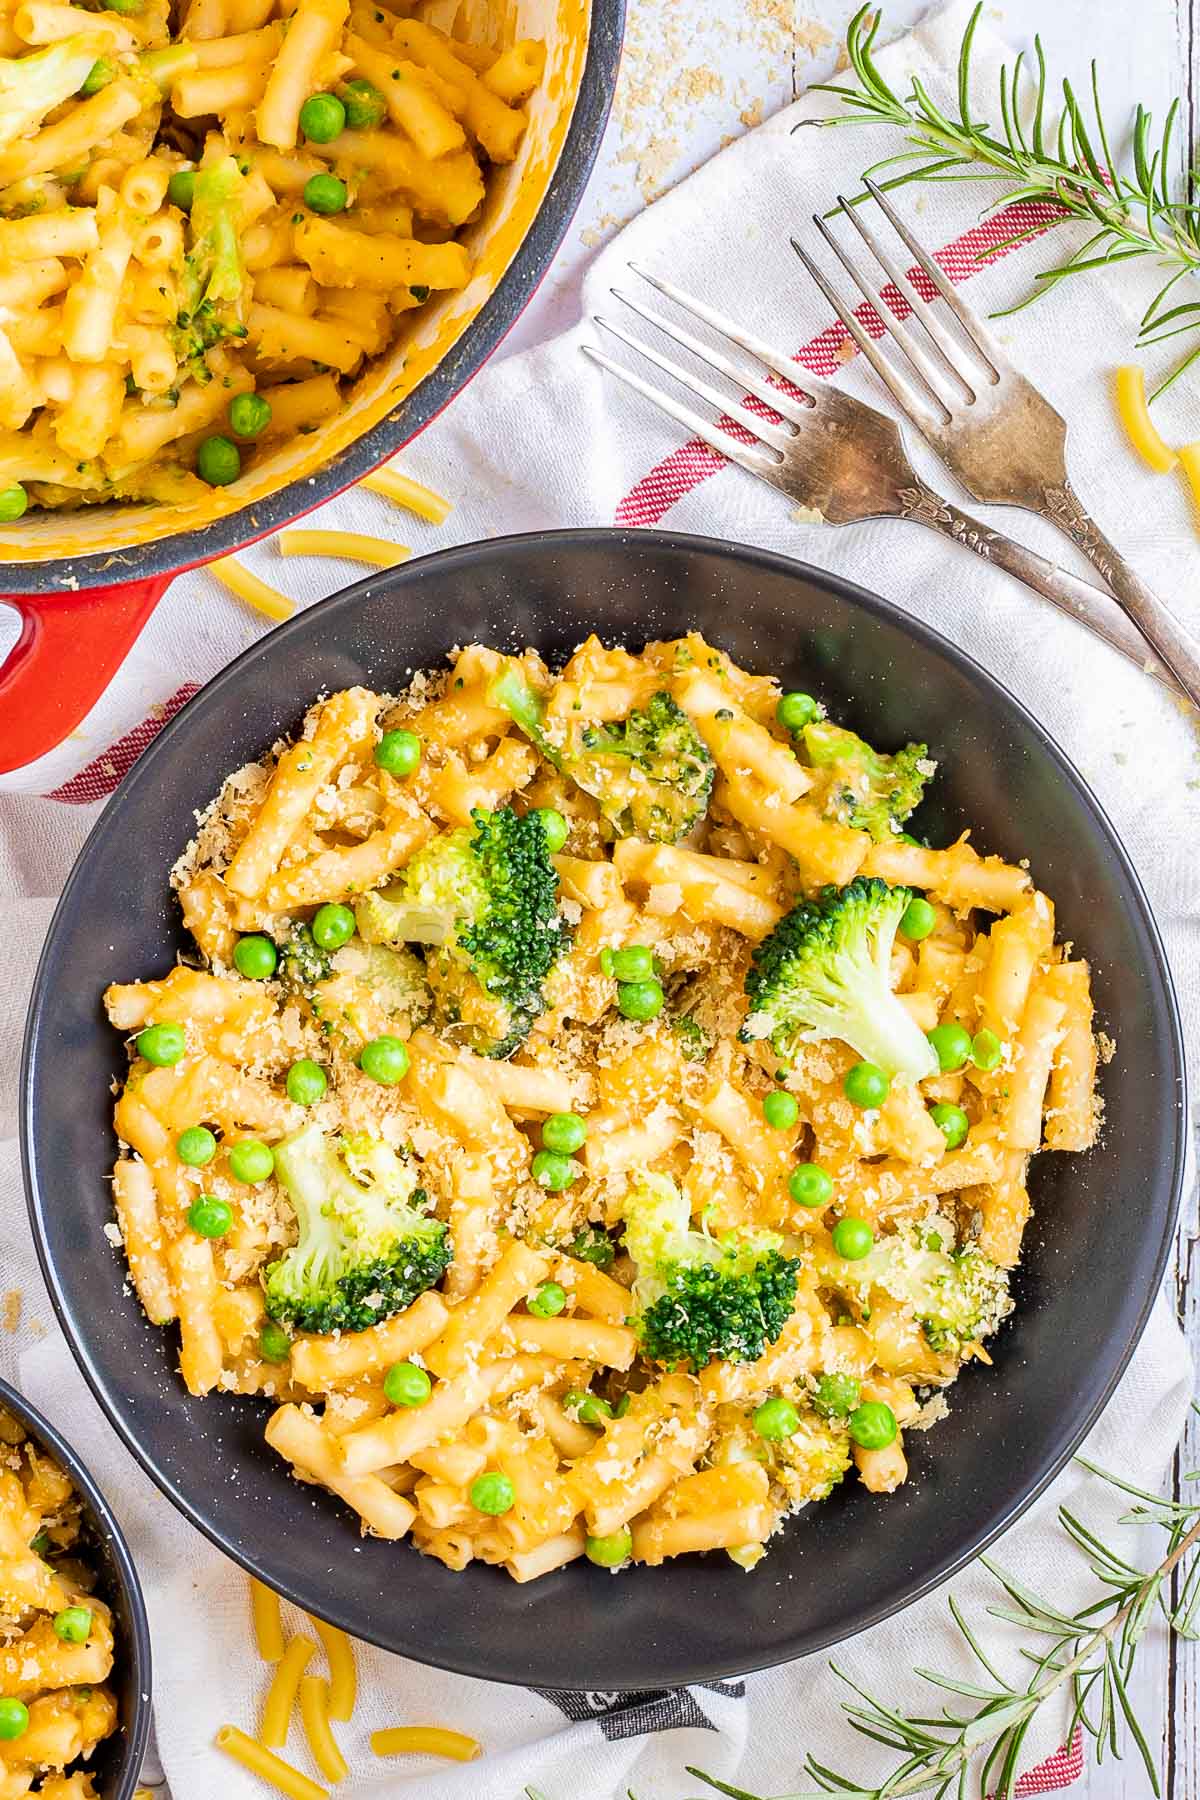 A red white enameled Dutch oven and 2 black bowls are serving short pasta in thick yellow sauce with broccoli florets and green peas added as toppings. 